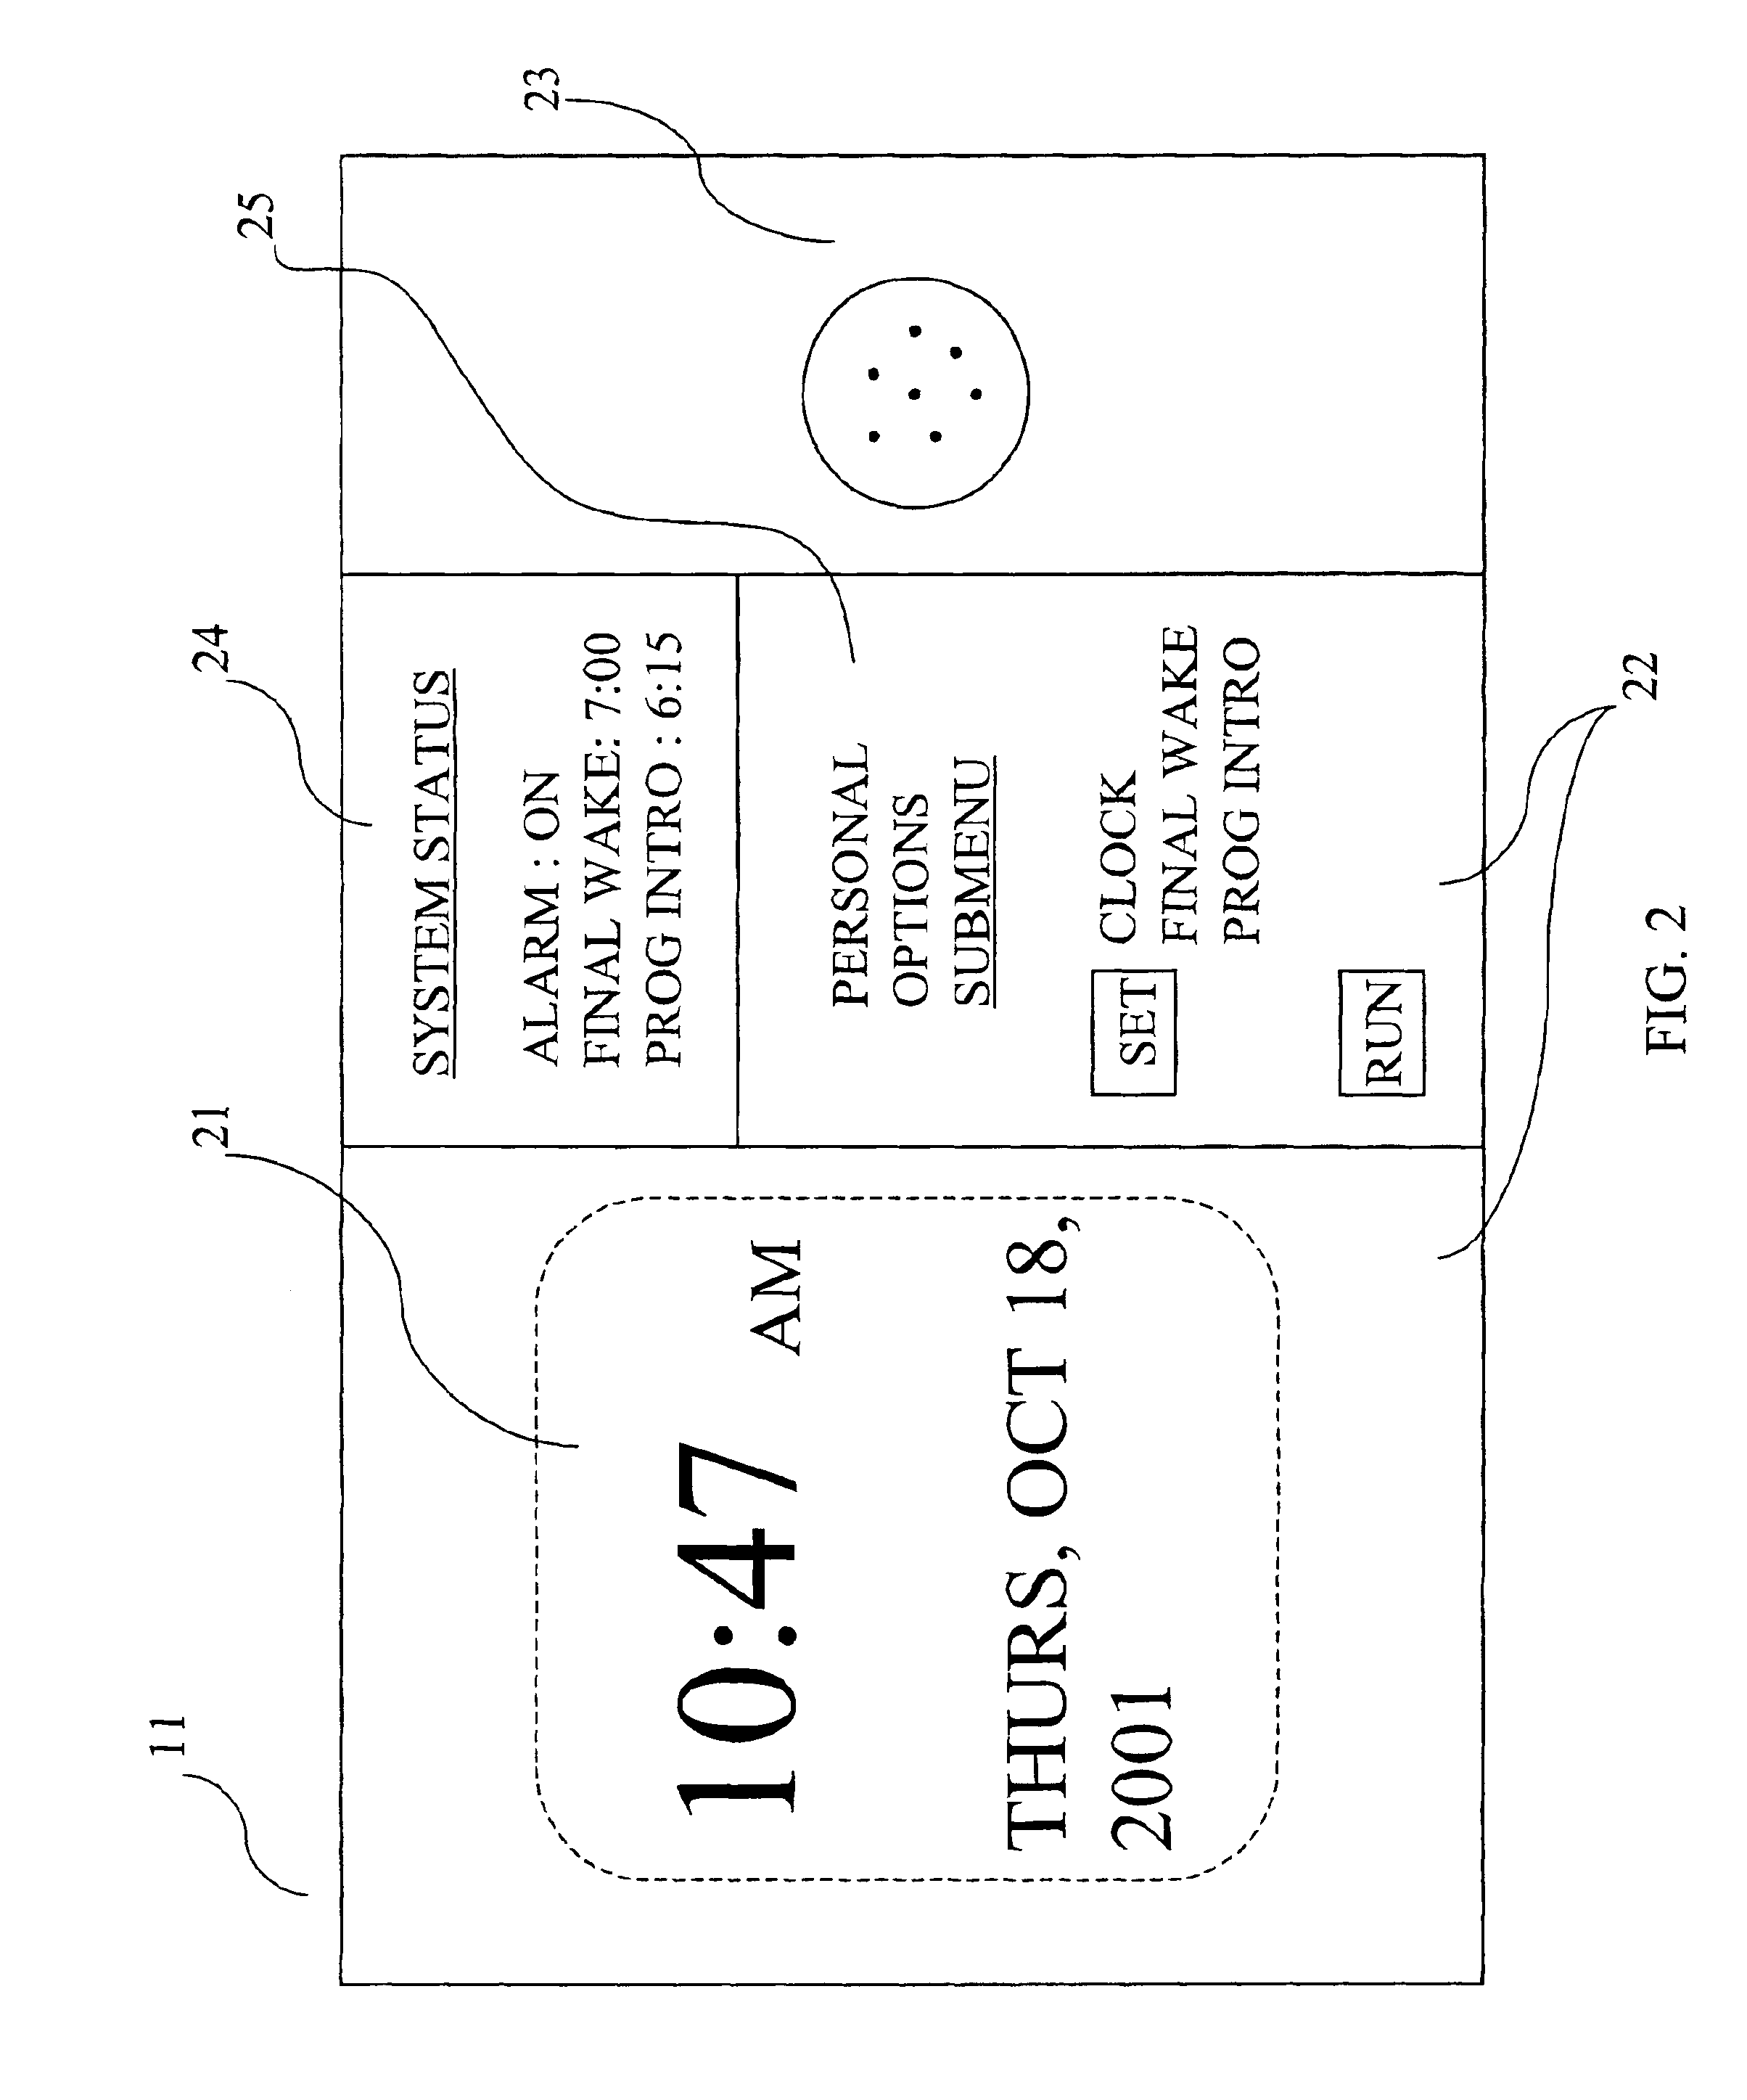 Method and apparatus for a waking control system